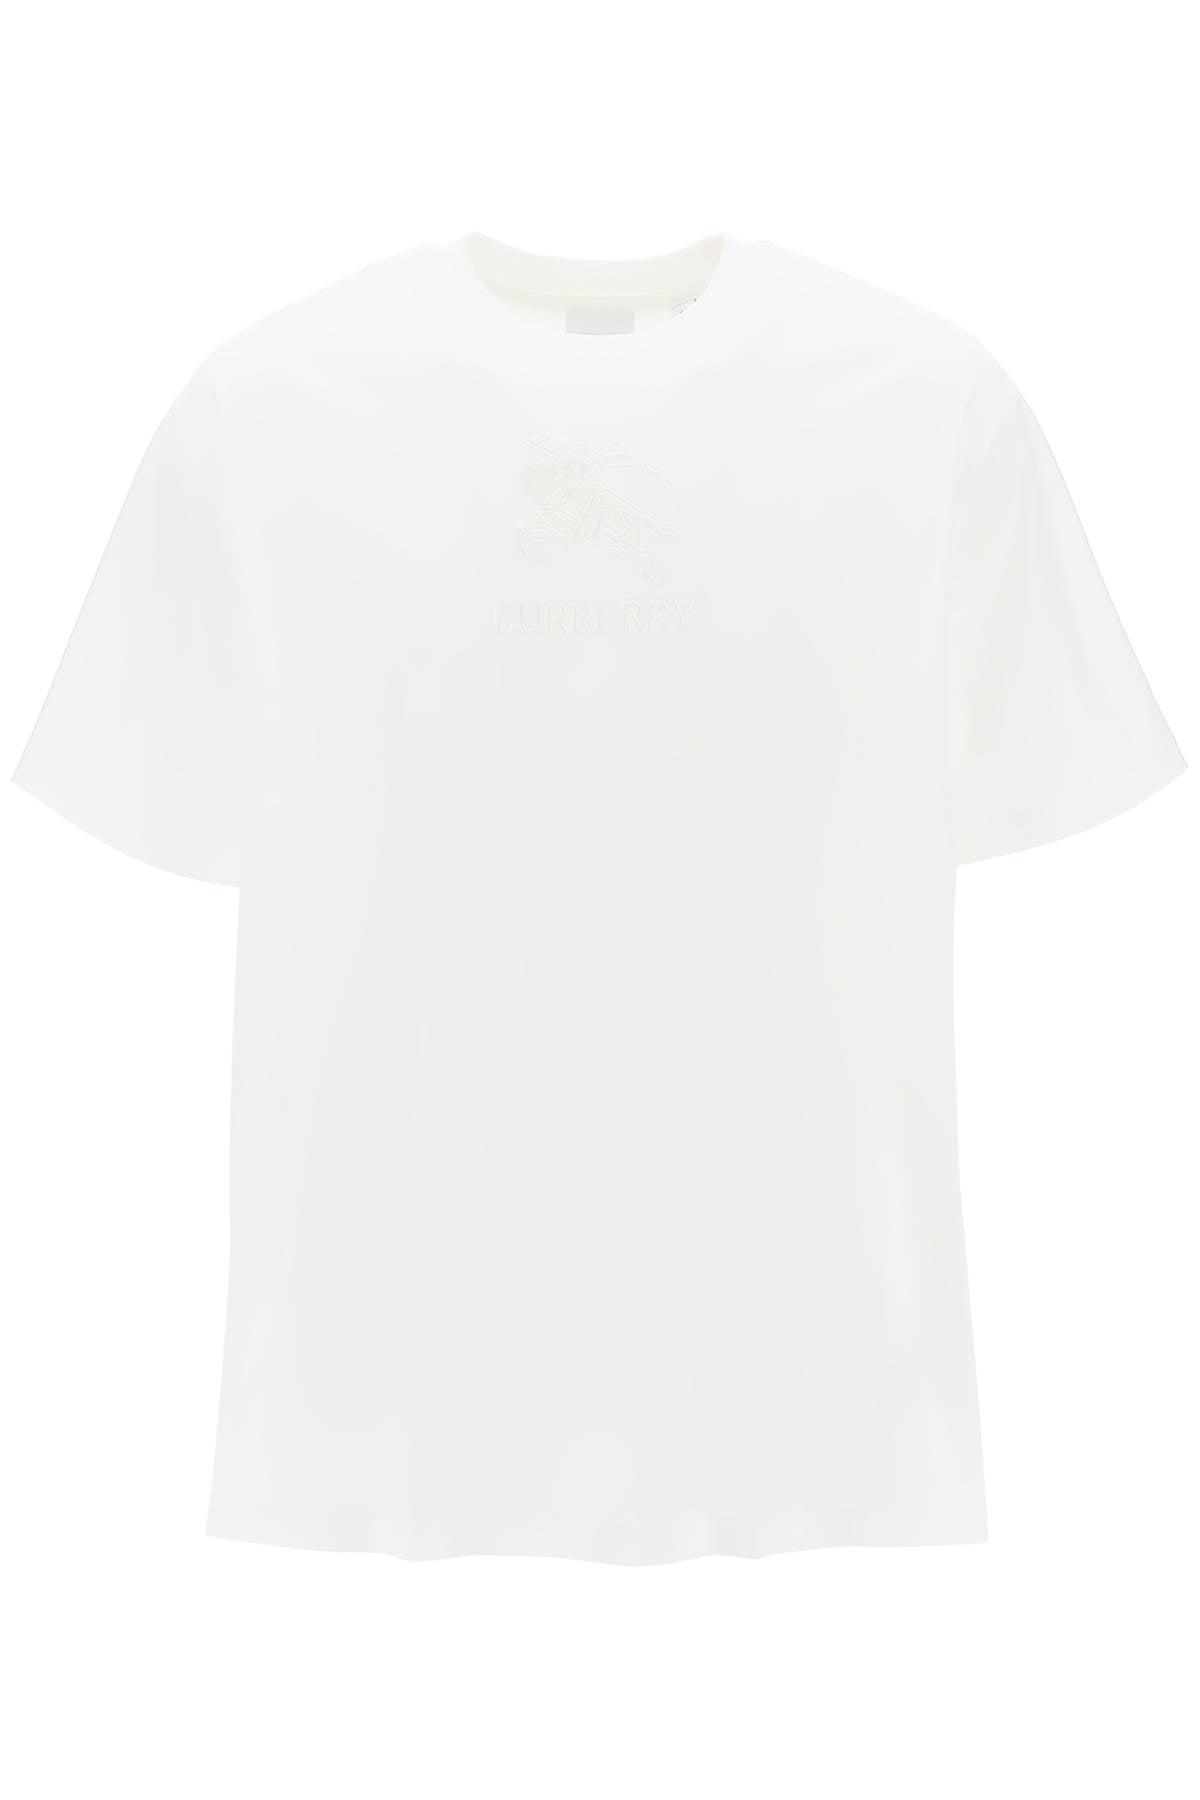 Burberry Burberry tempah t-shirt with embroidered ekd